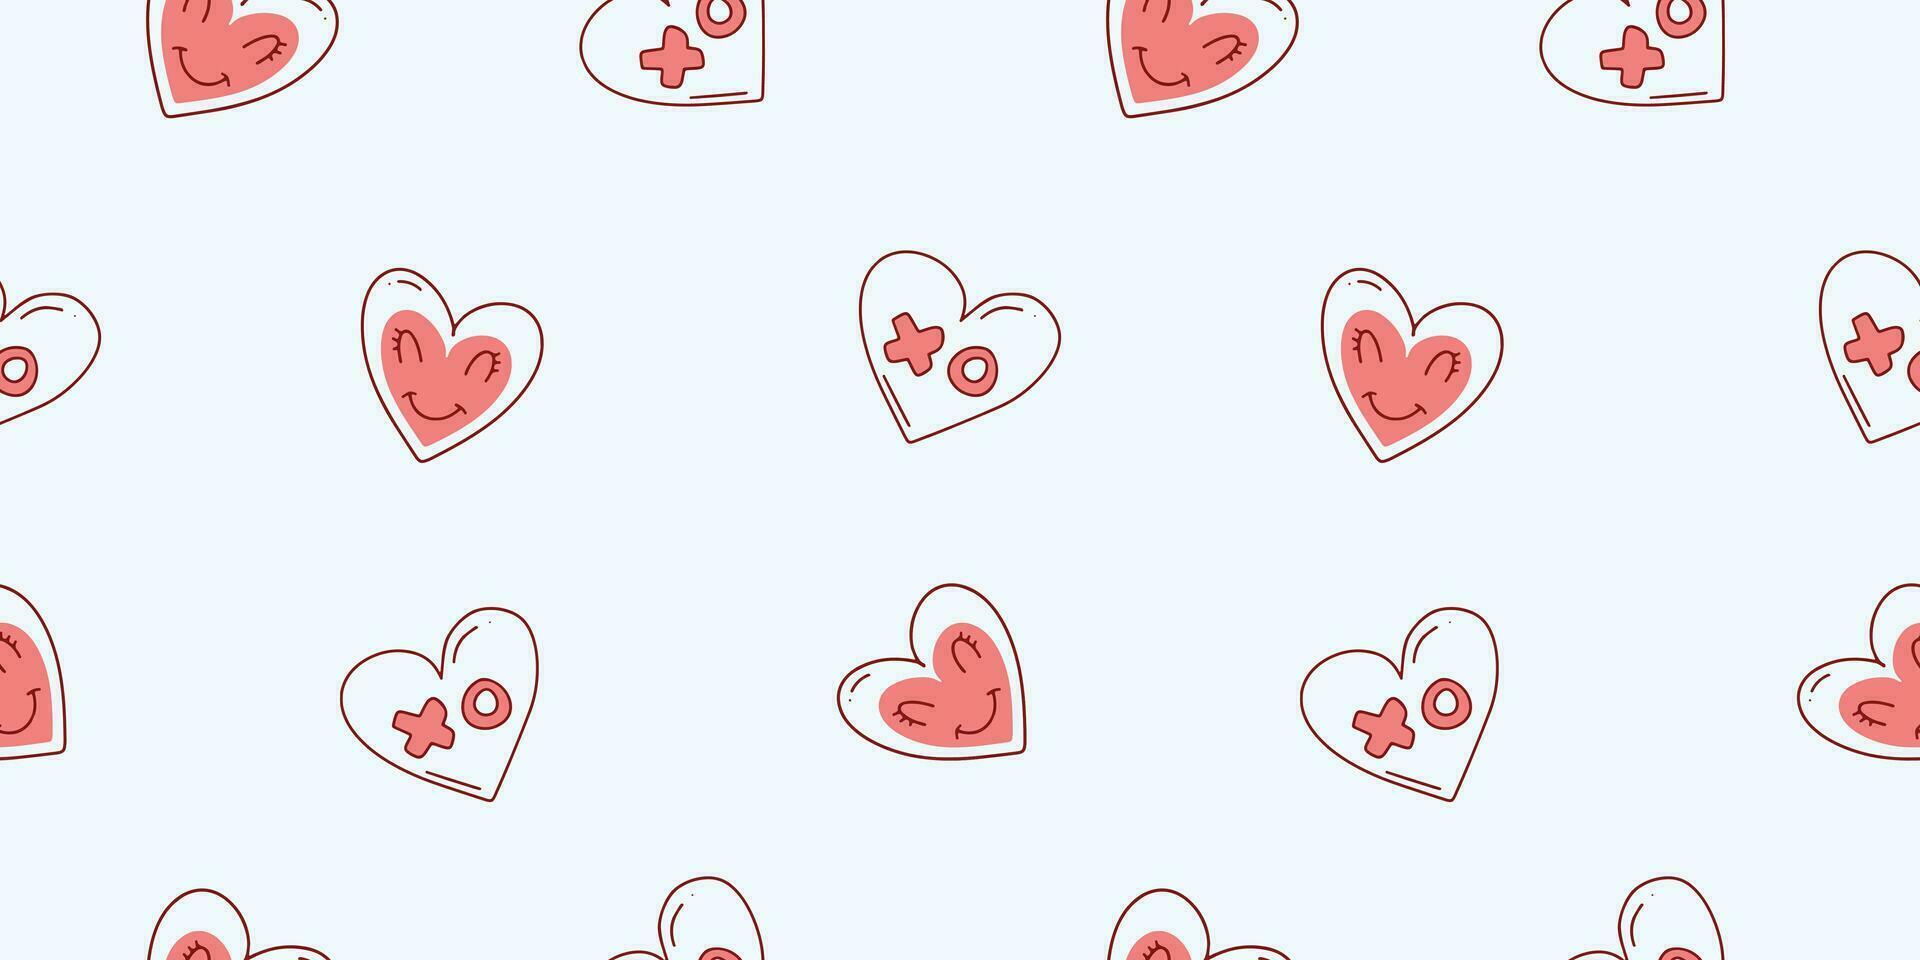 Seamless pattern for Valentine's Day with heart and love elements on a white background. Vector doodle theme set, romance for cards, banners, flyers, invitation, blog, wrapping paper, prints.